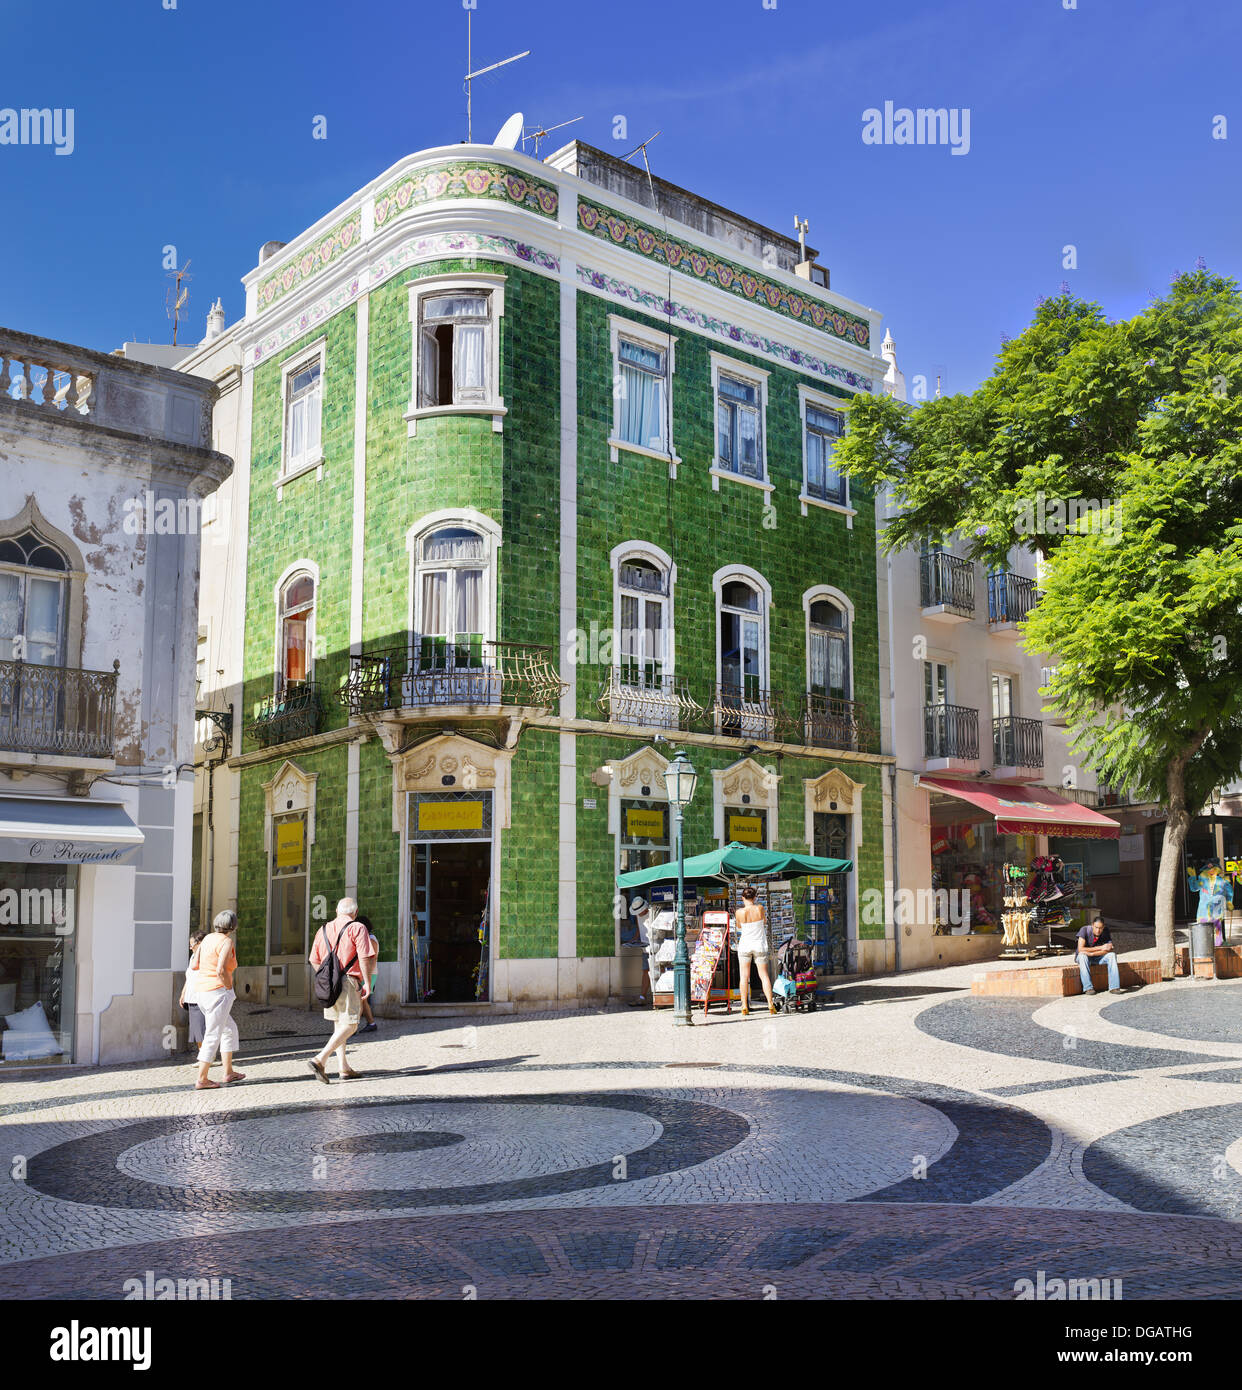 Tiled building in Lagos Portugal Stock Photo